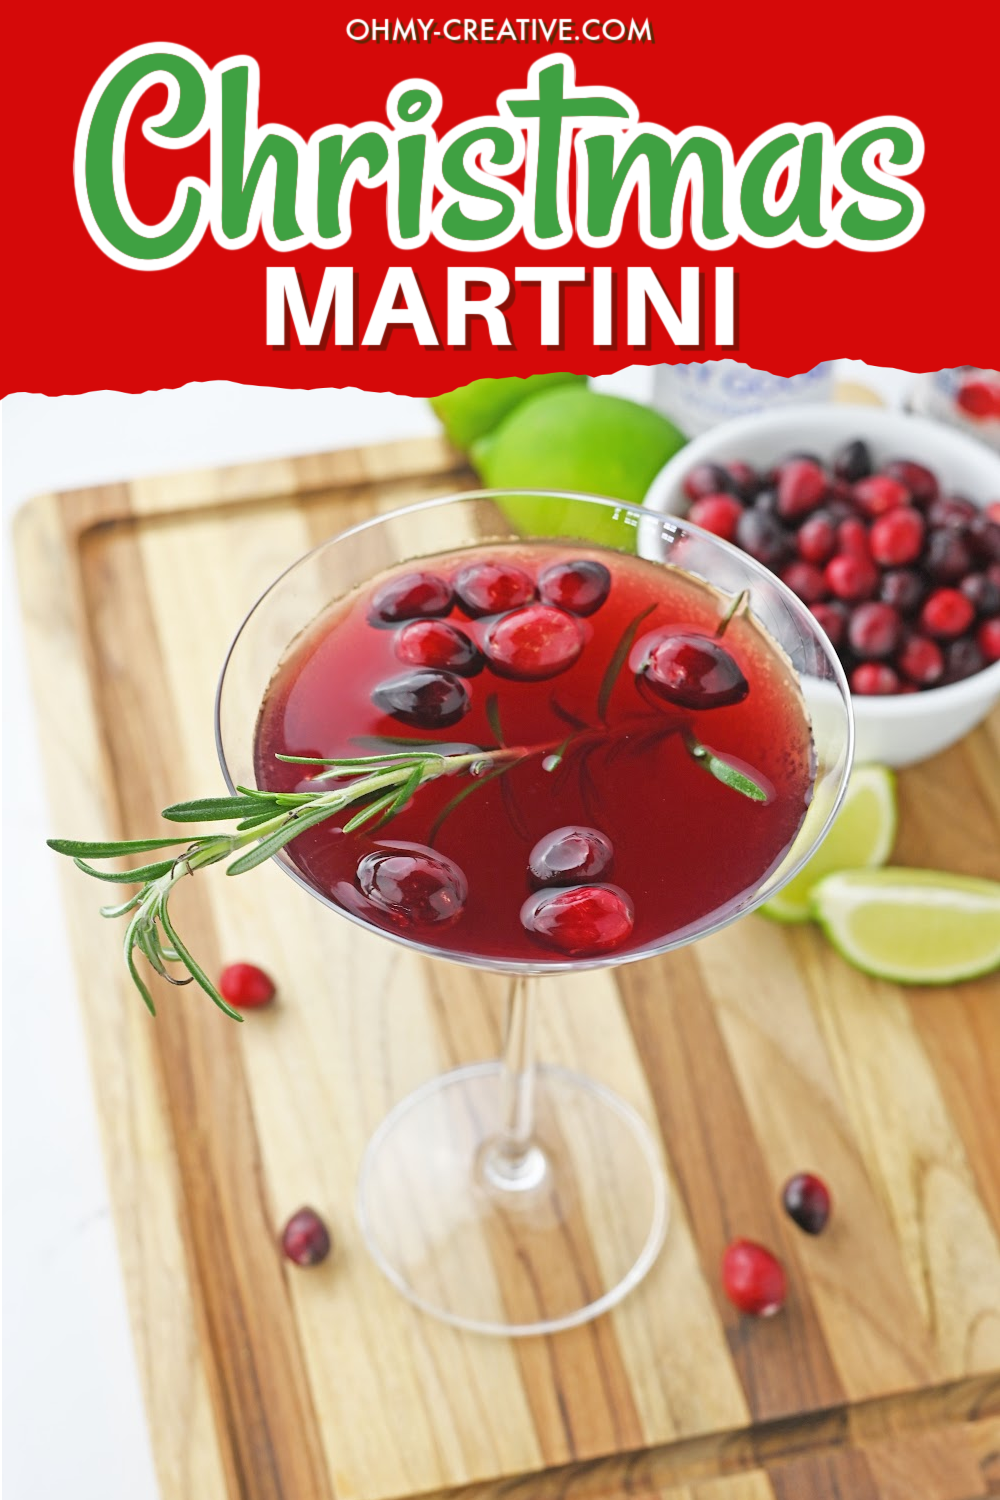 Celebrate The Season With This Christmas Martini Cocktail